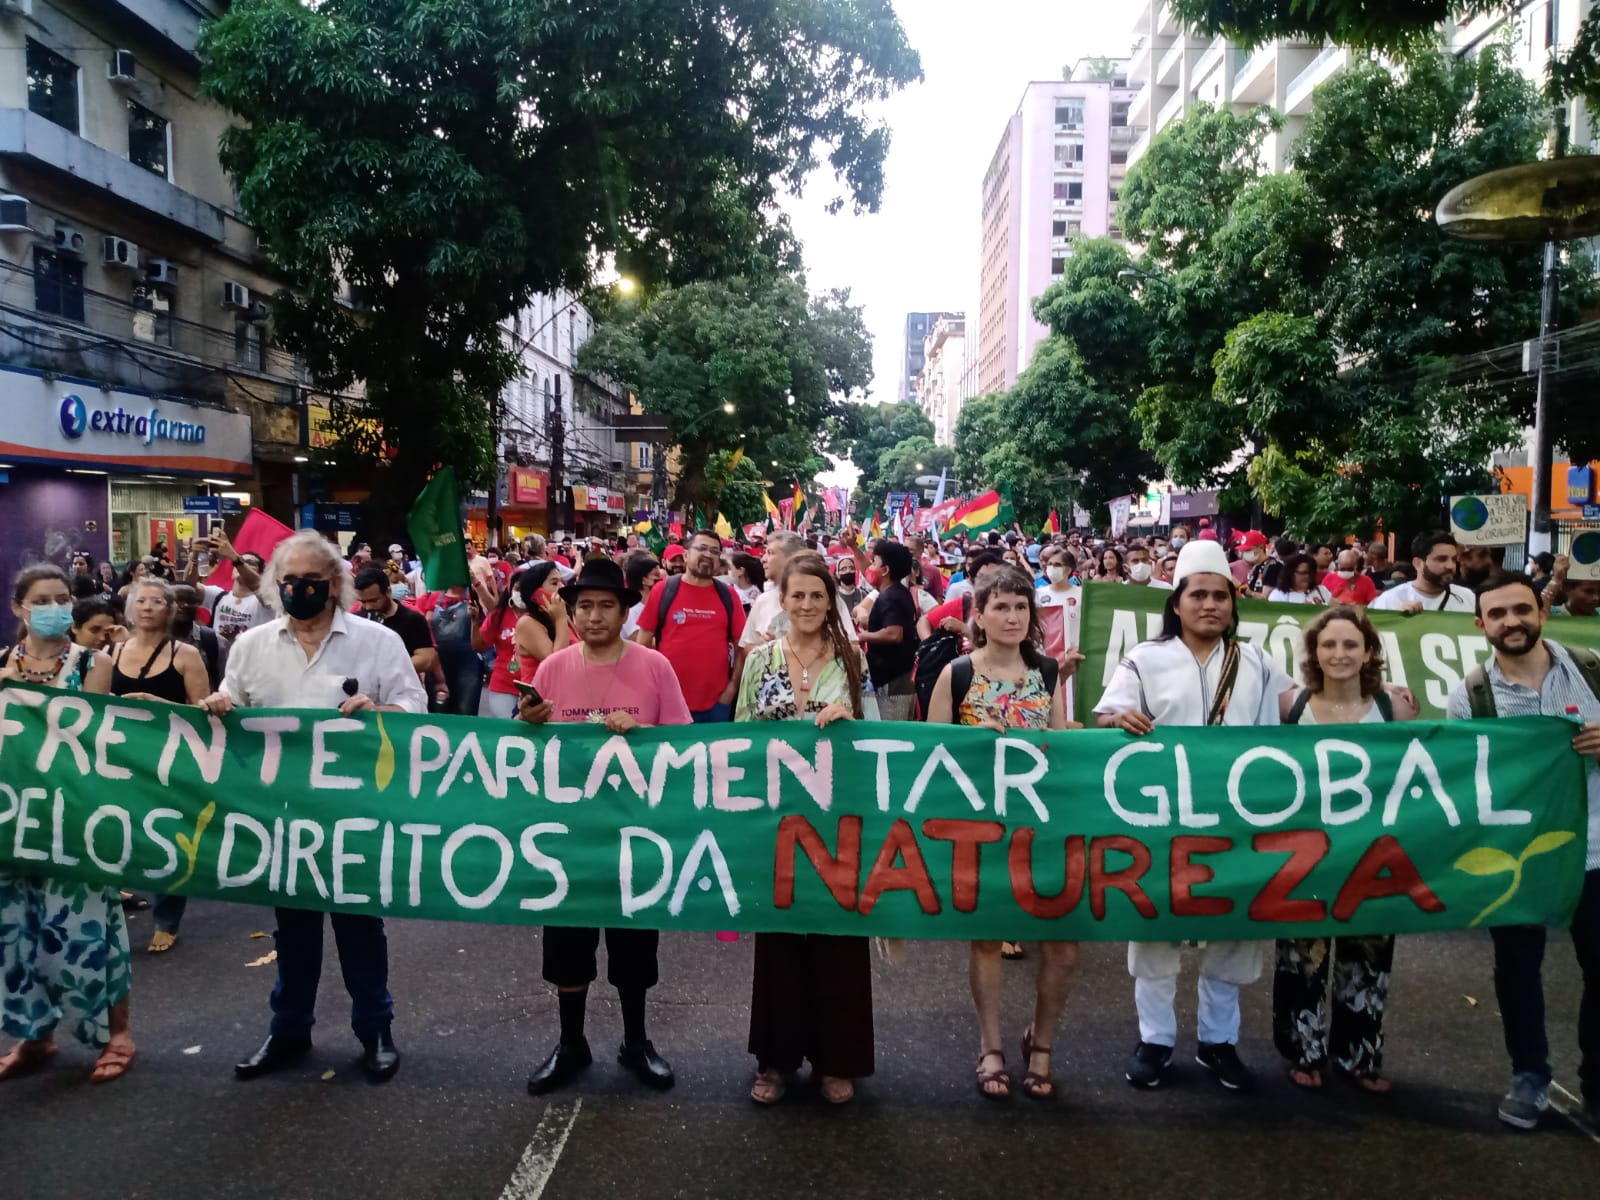 The Global Parliamentary Front for the Rights of Nature was officially launched in FOSPA